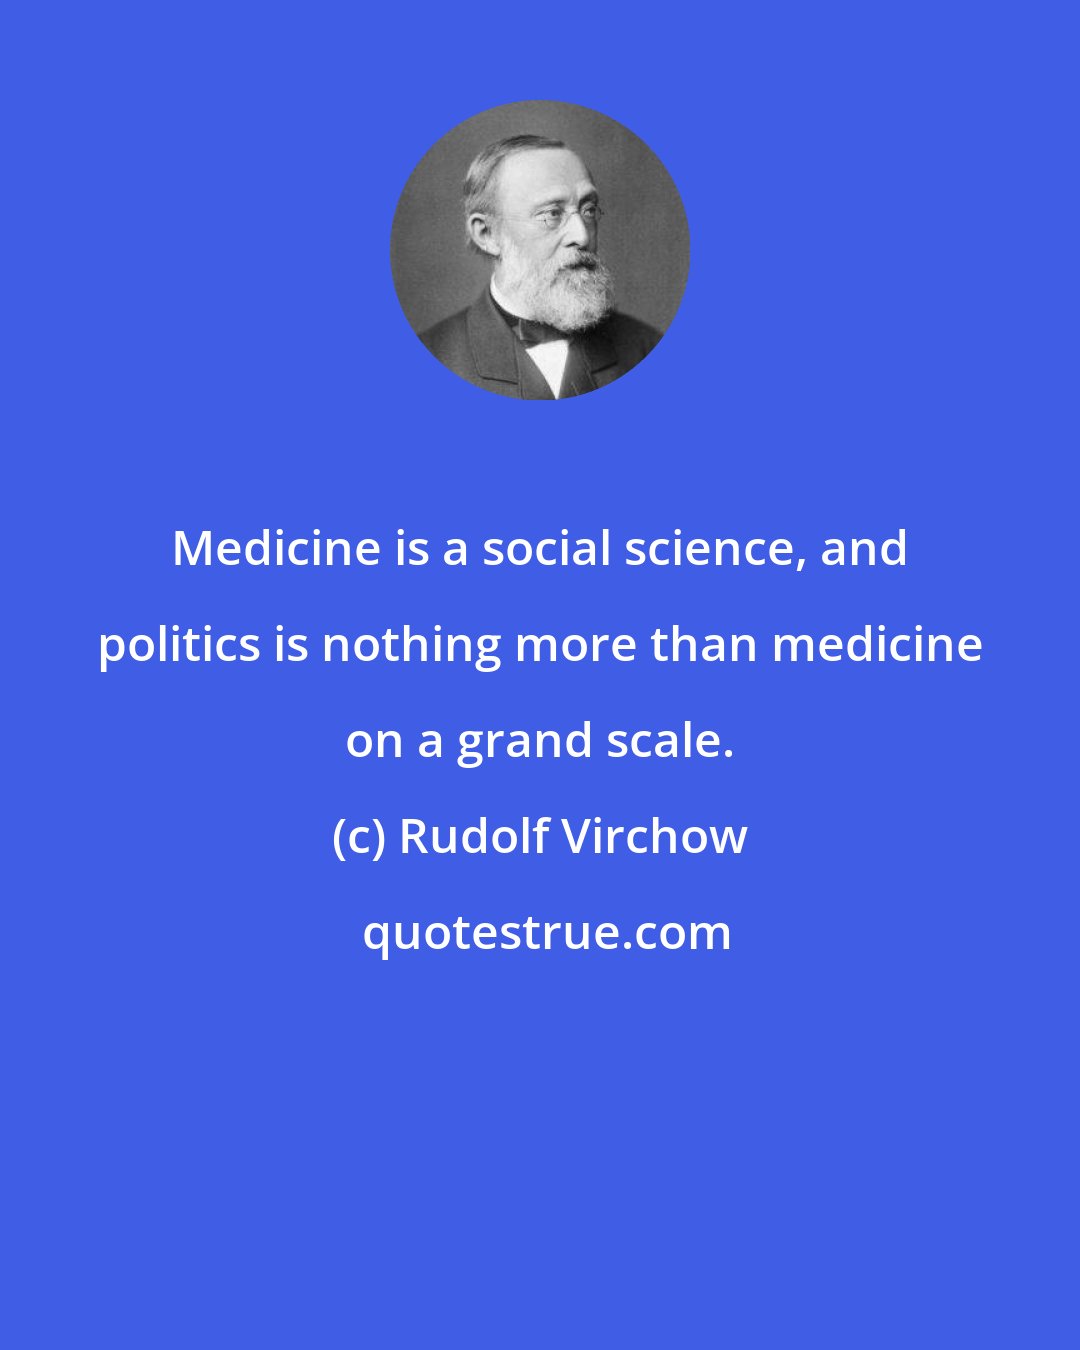 Rudolf Virchow: Medicine is a social science, and politics is nothing more than medicine on a grand scale.